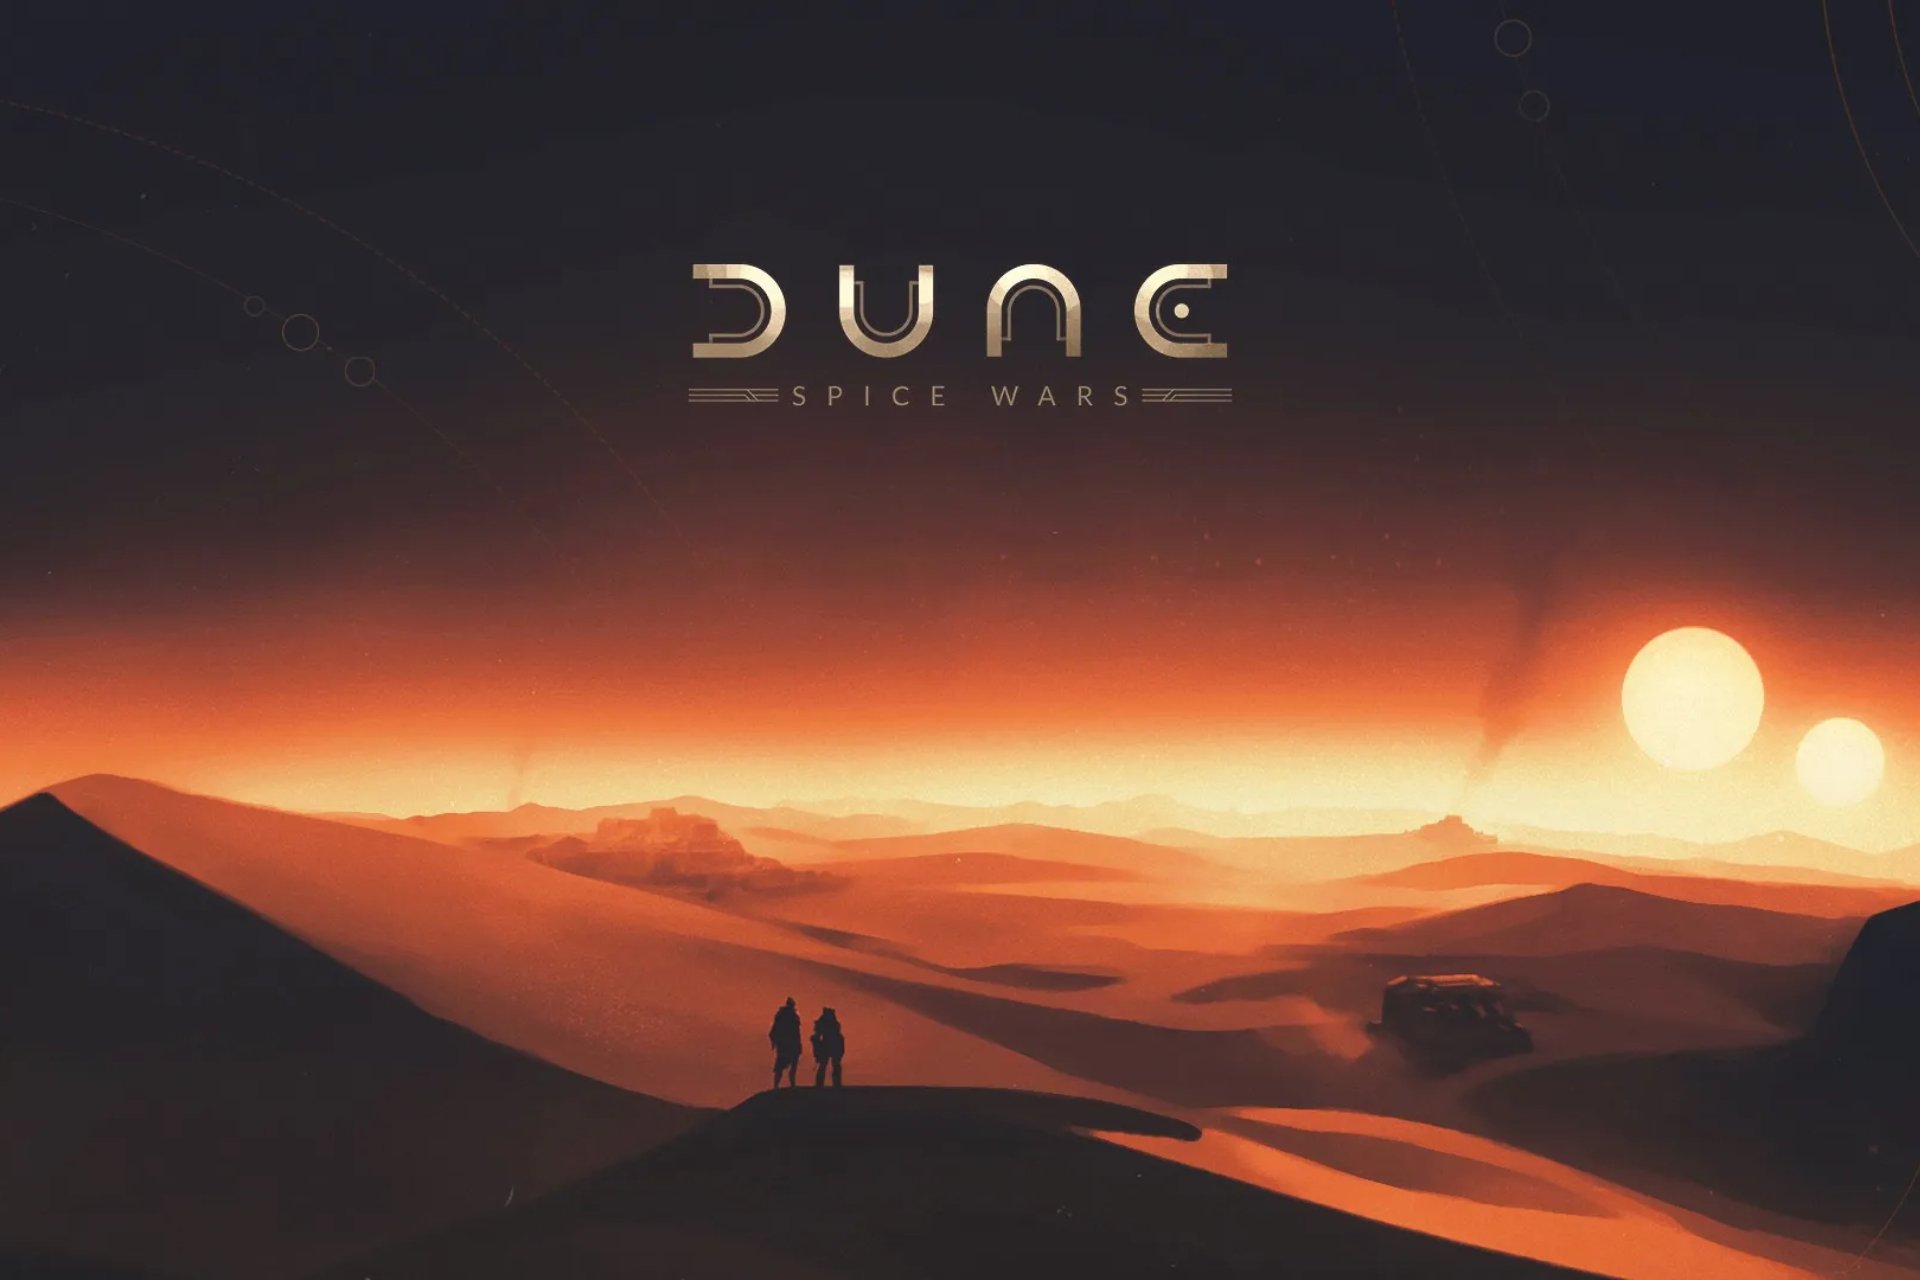 Dune Spice Wars is coming to PC via game pass